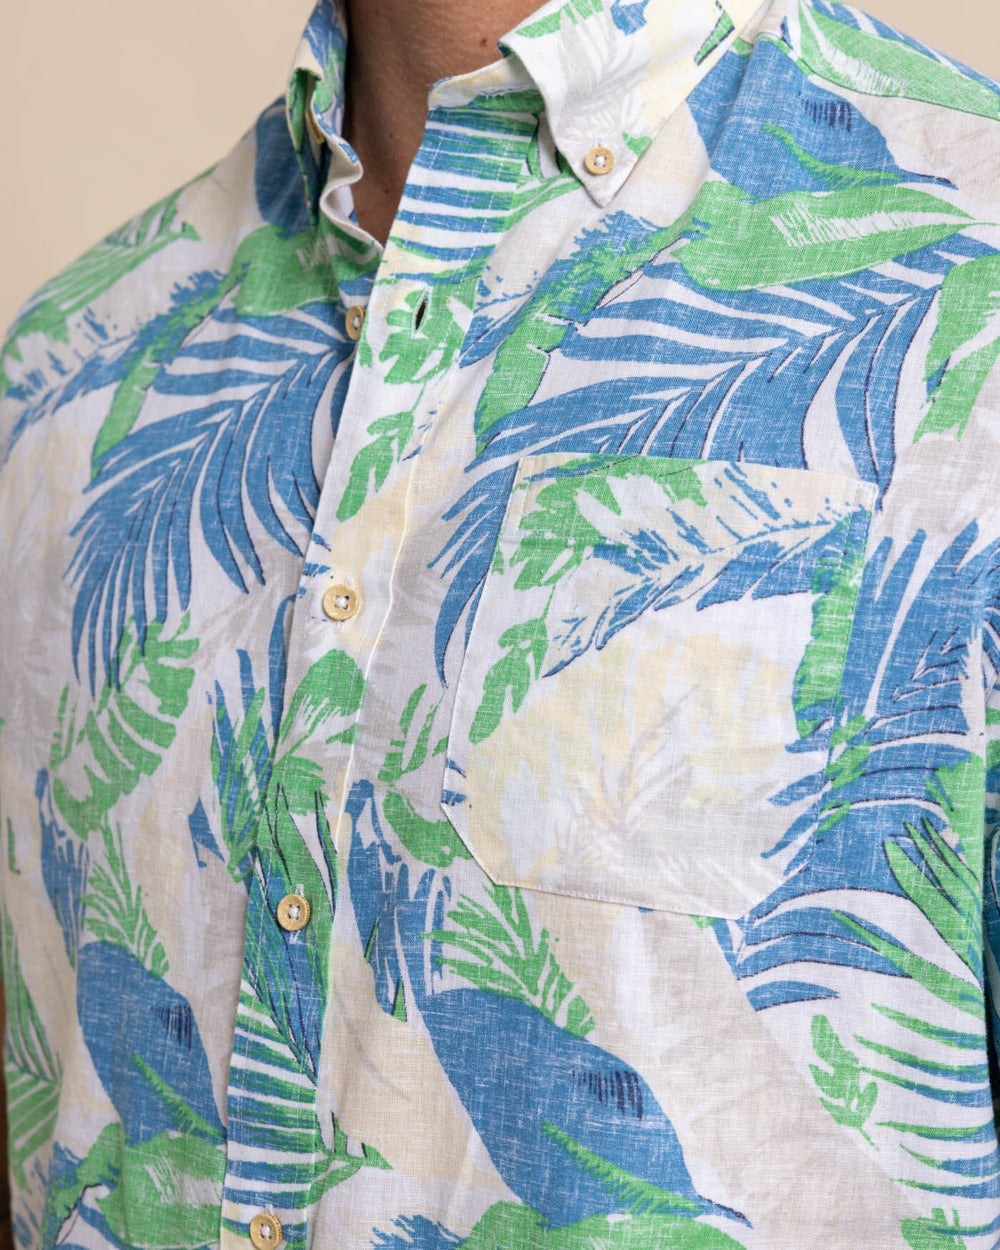 The detail view of the Southern Tide Paradise Palms Linen Rayon Short Sleeve Sport Shirt by Southern Tide - Classic White